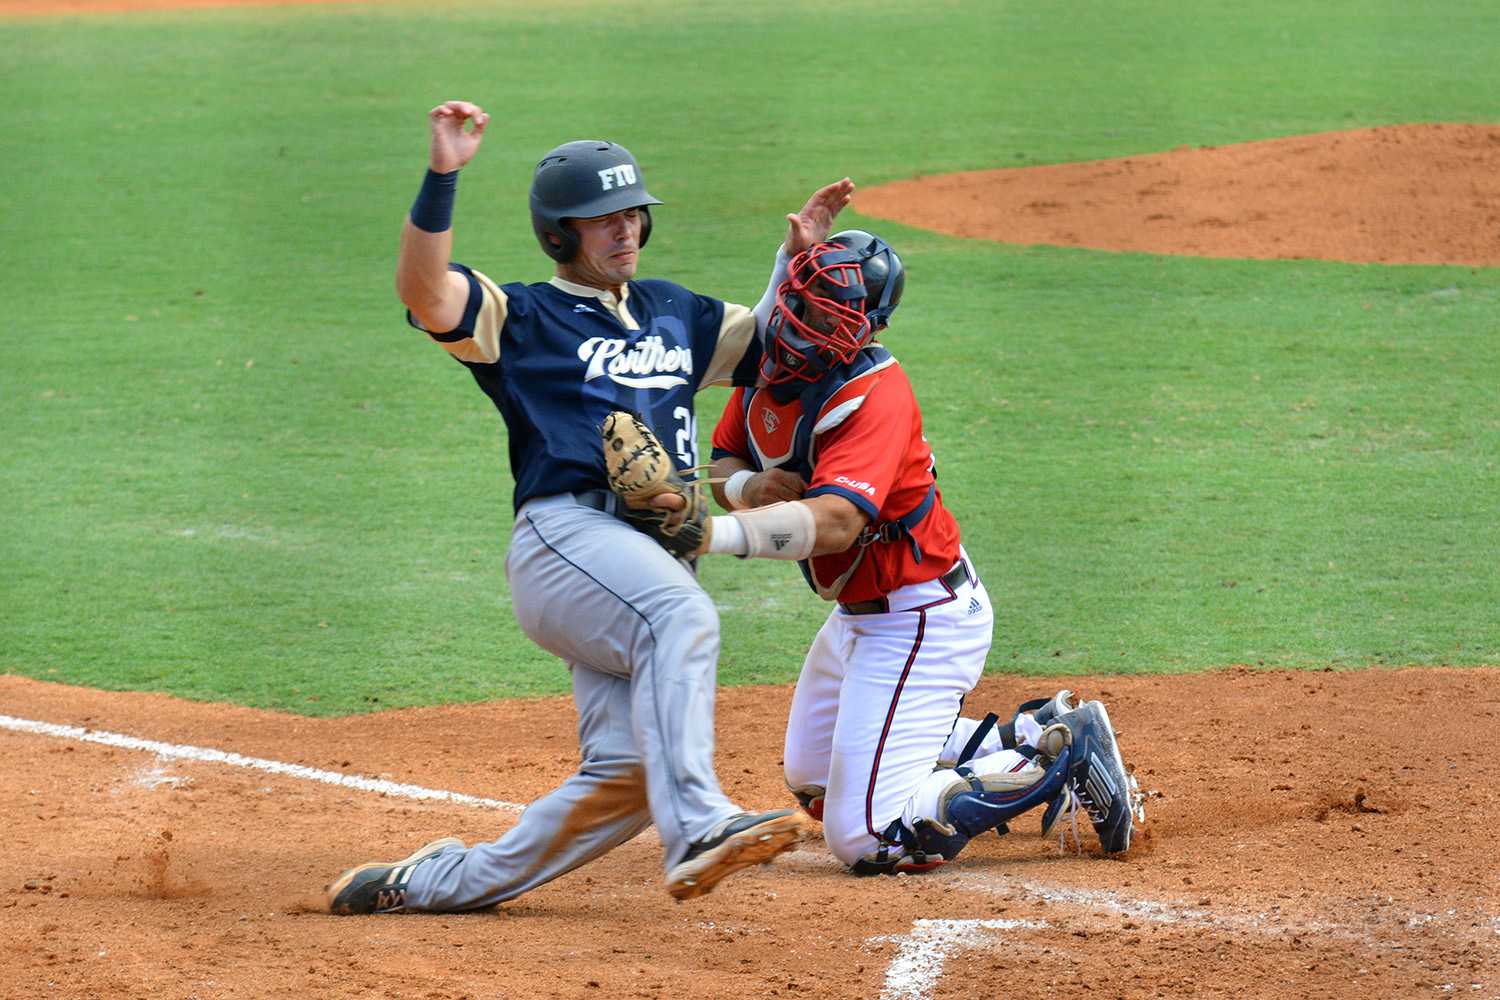 FIU attempts to score against FAU early in Saturday’s matchup. FAU came back to win the game 8-3 thanks to a powerful sixth inning for the Owls. Michelle Friswell | Associate Editor 